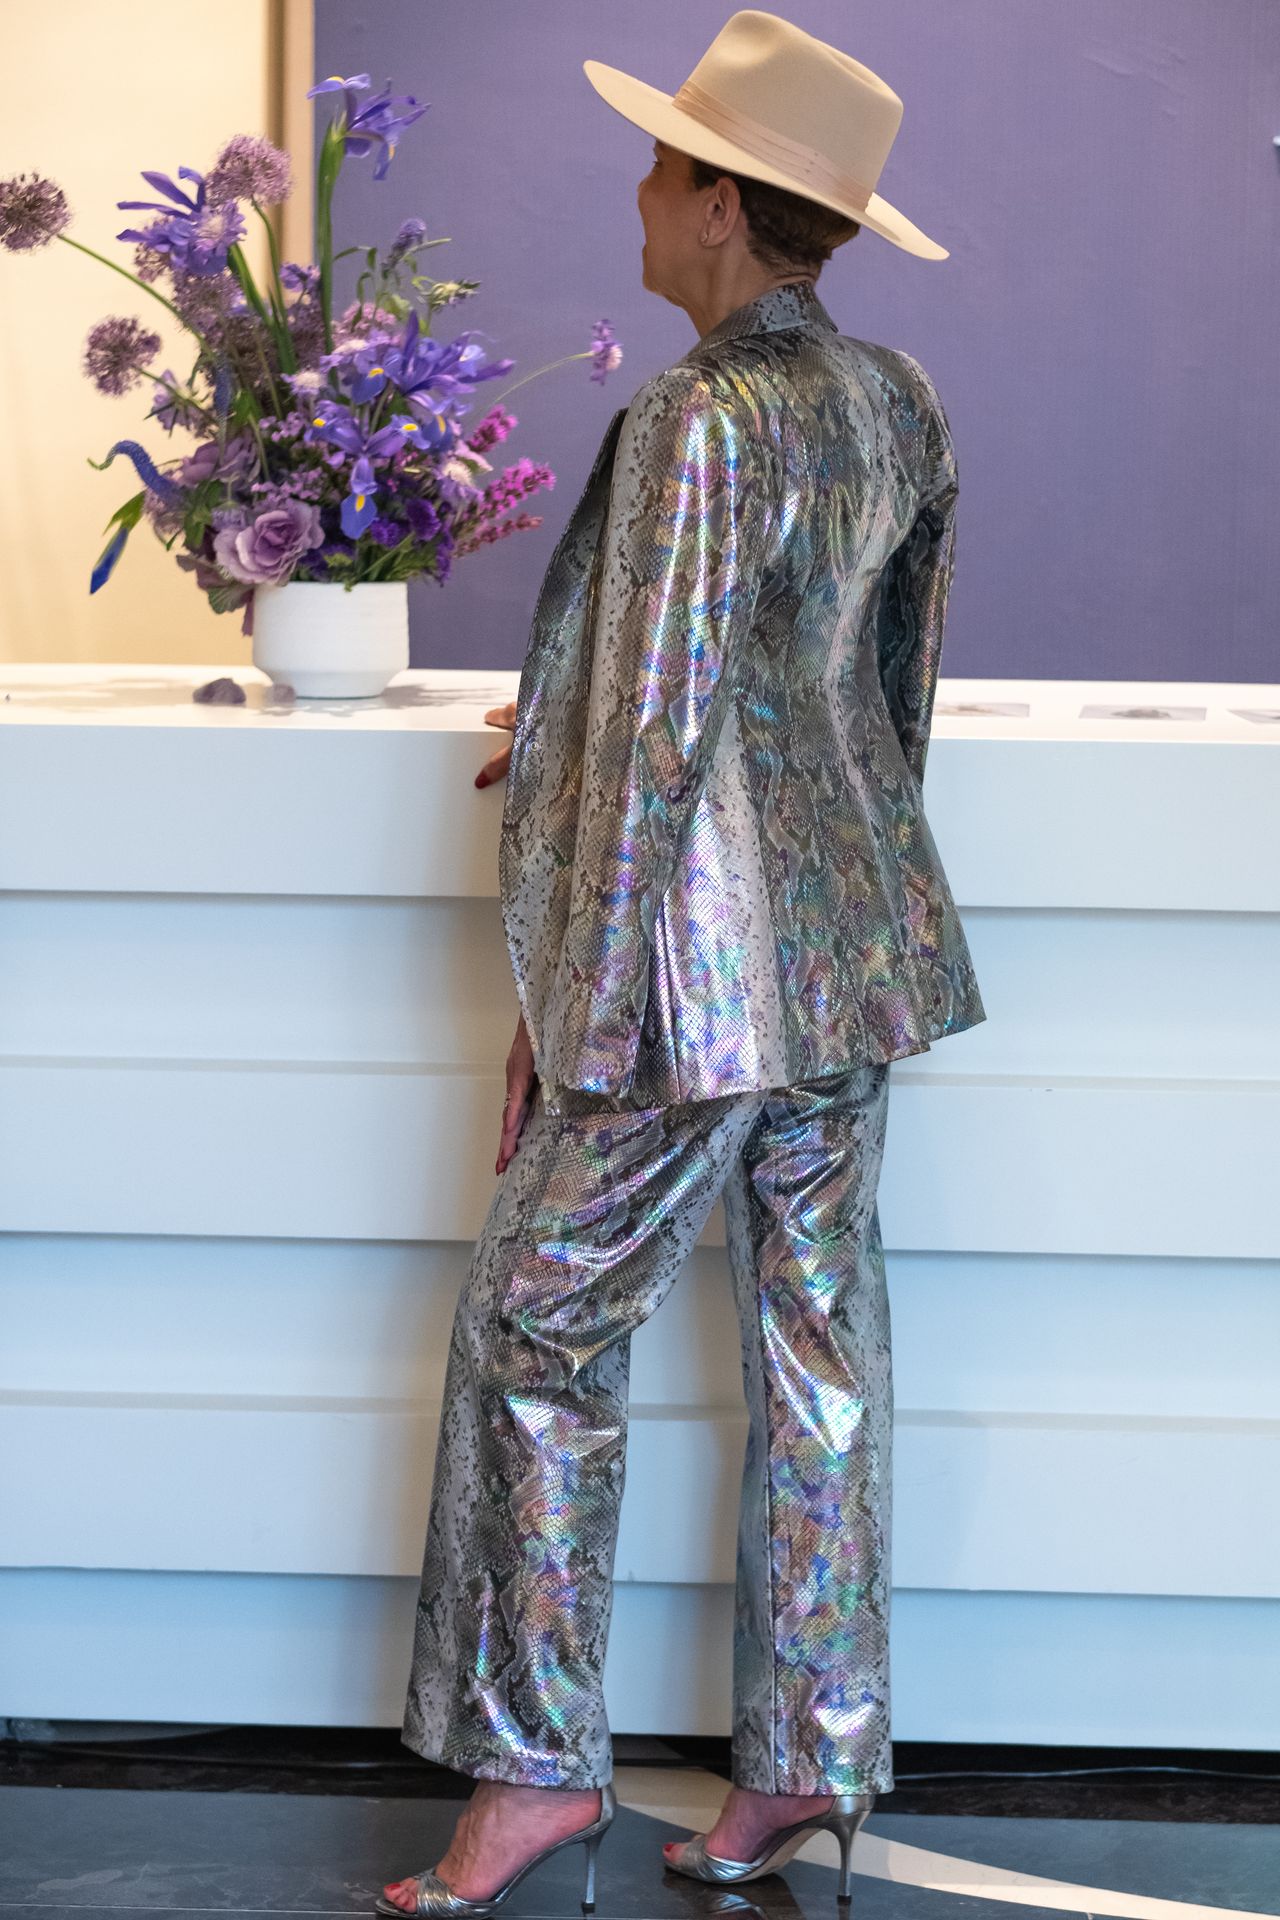 “When your best friend says 'Bring your best cowgirl spirit to the event,' I wanted to show up properly," Sherri Blount said. "I thought this suit would fit the bill. It’s structured and elegant.”